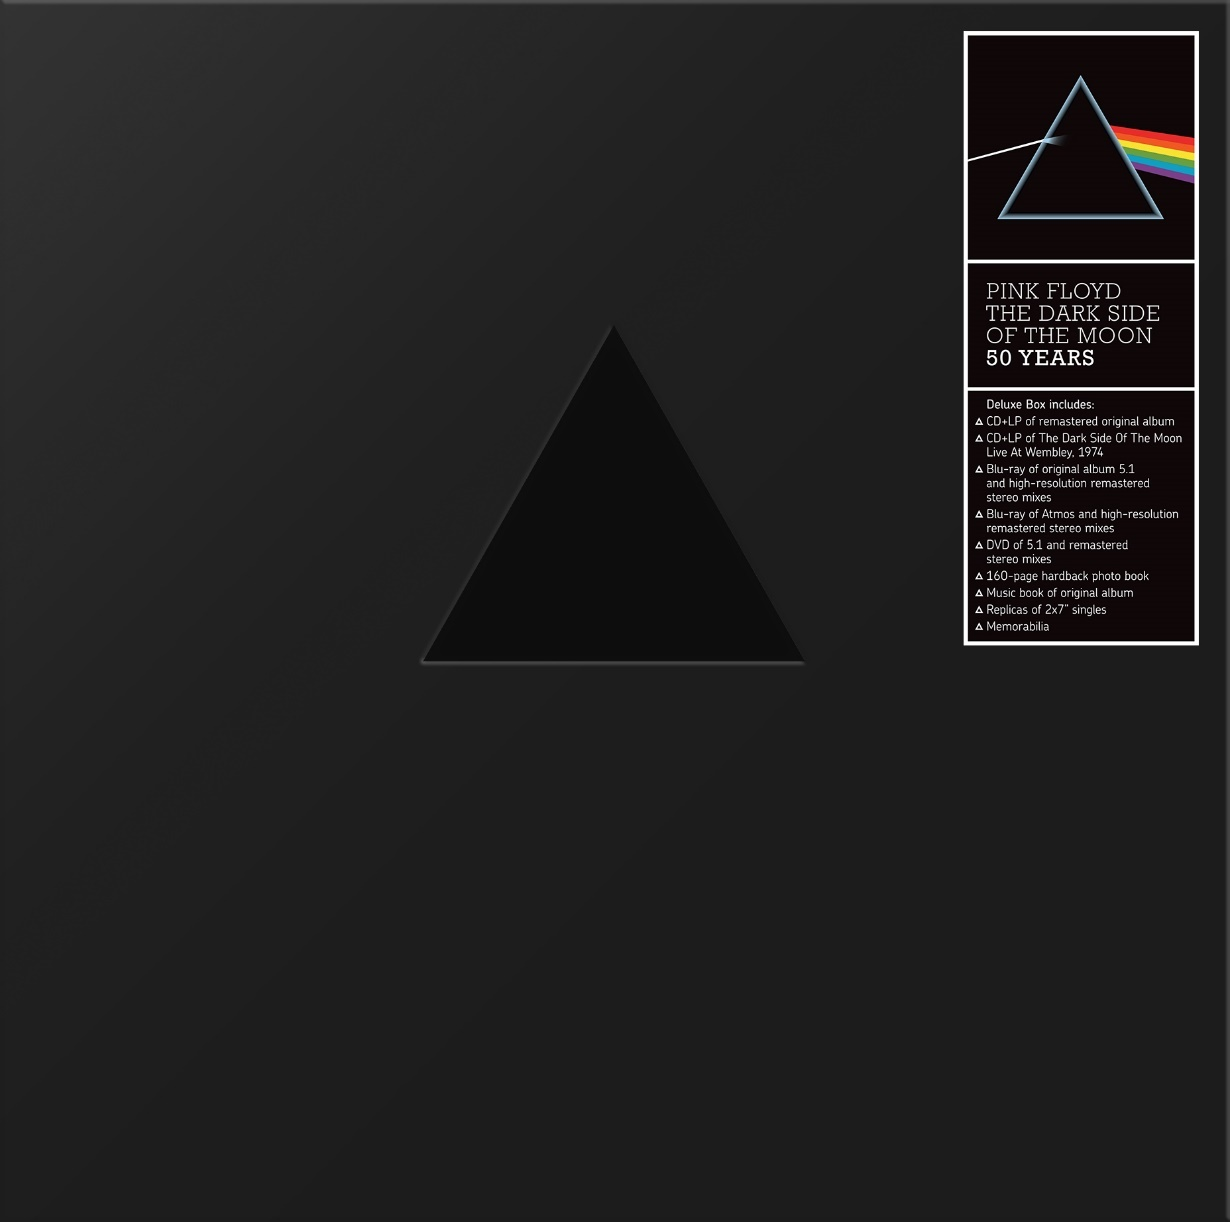 Pink Floyd - The Dark Side Of The Moon (50th Anniversary): Deluxe Box Set